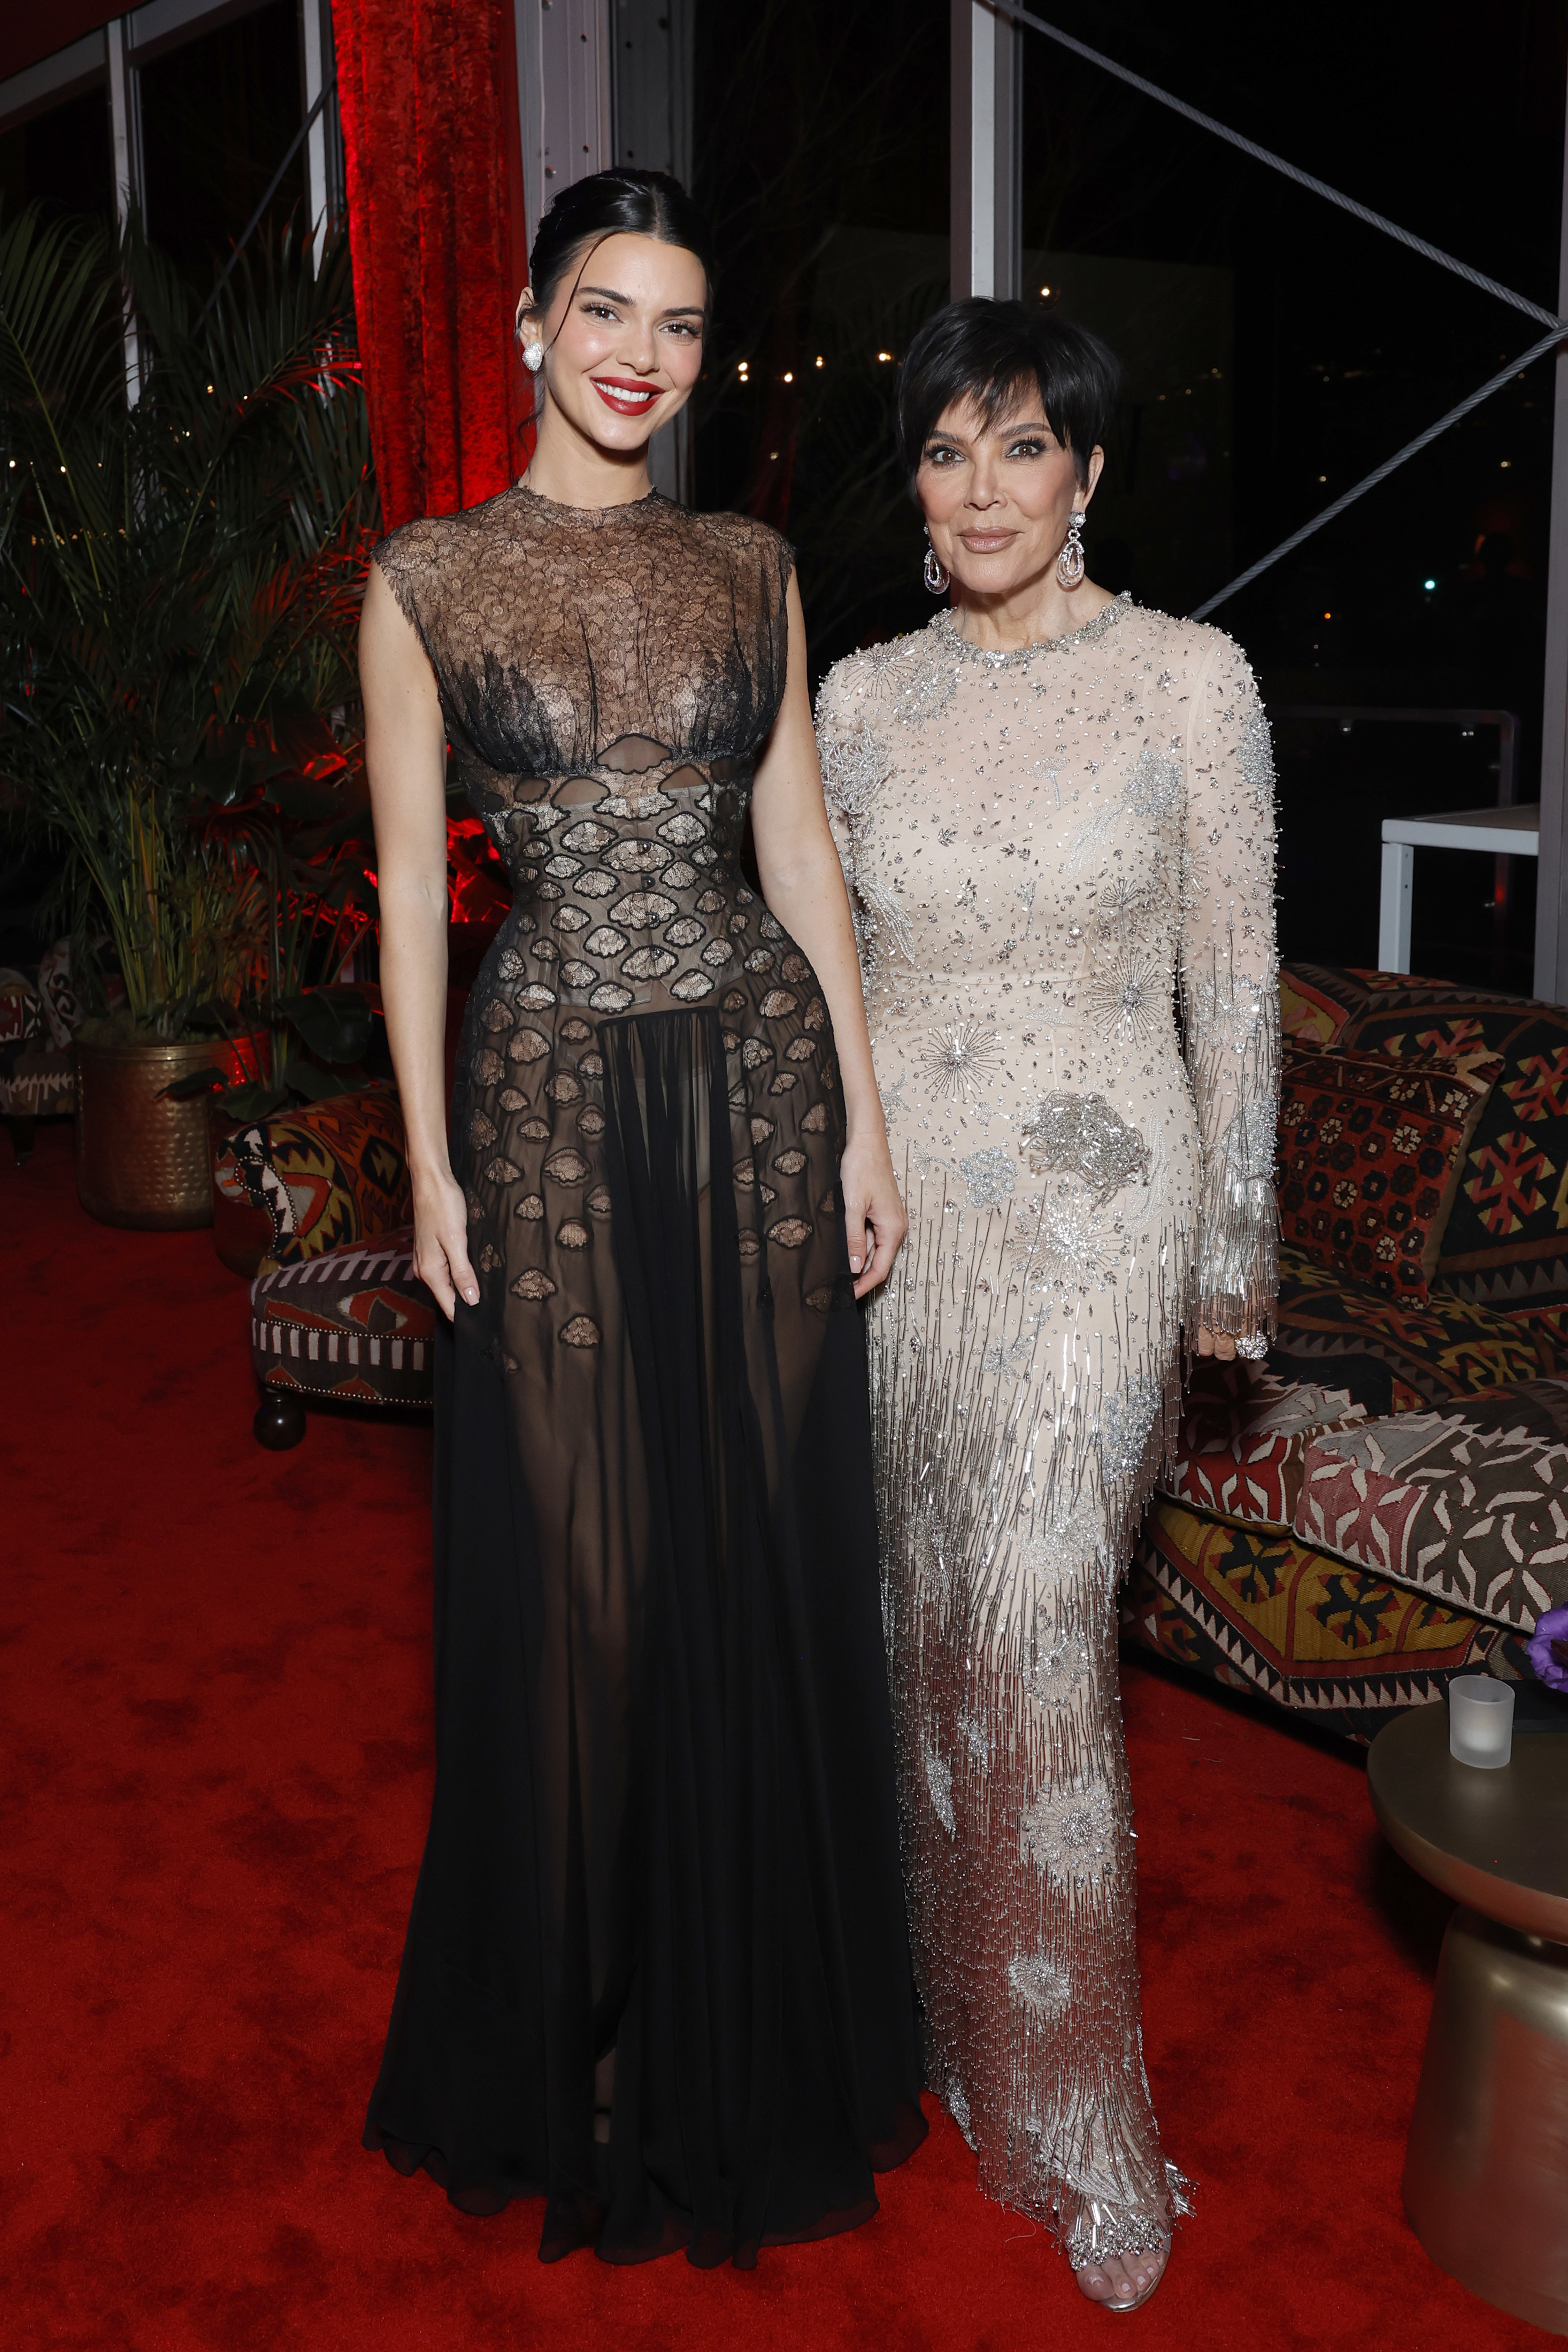 Kendall Jenner and Kris Jenner at a formal event